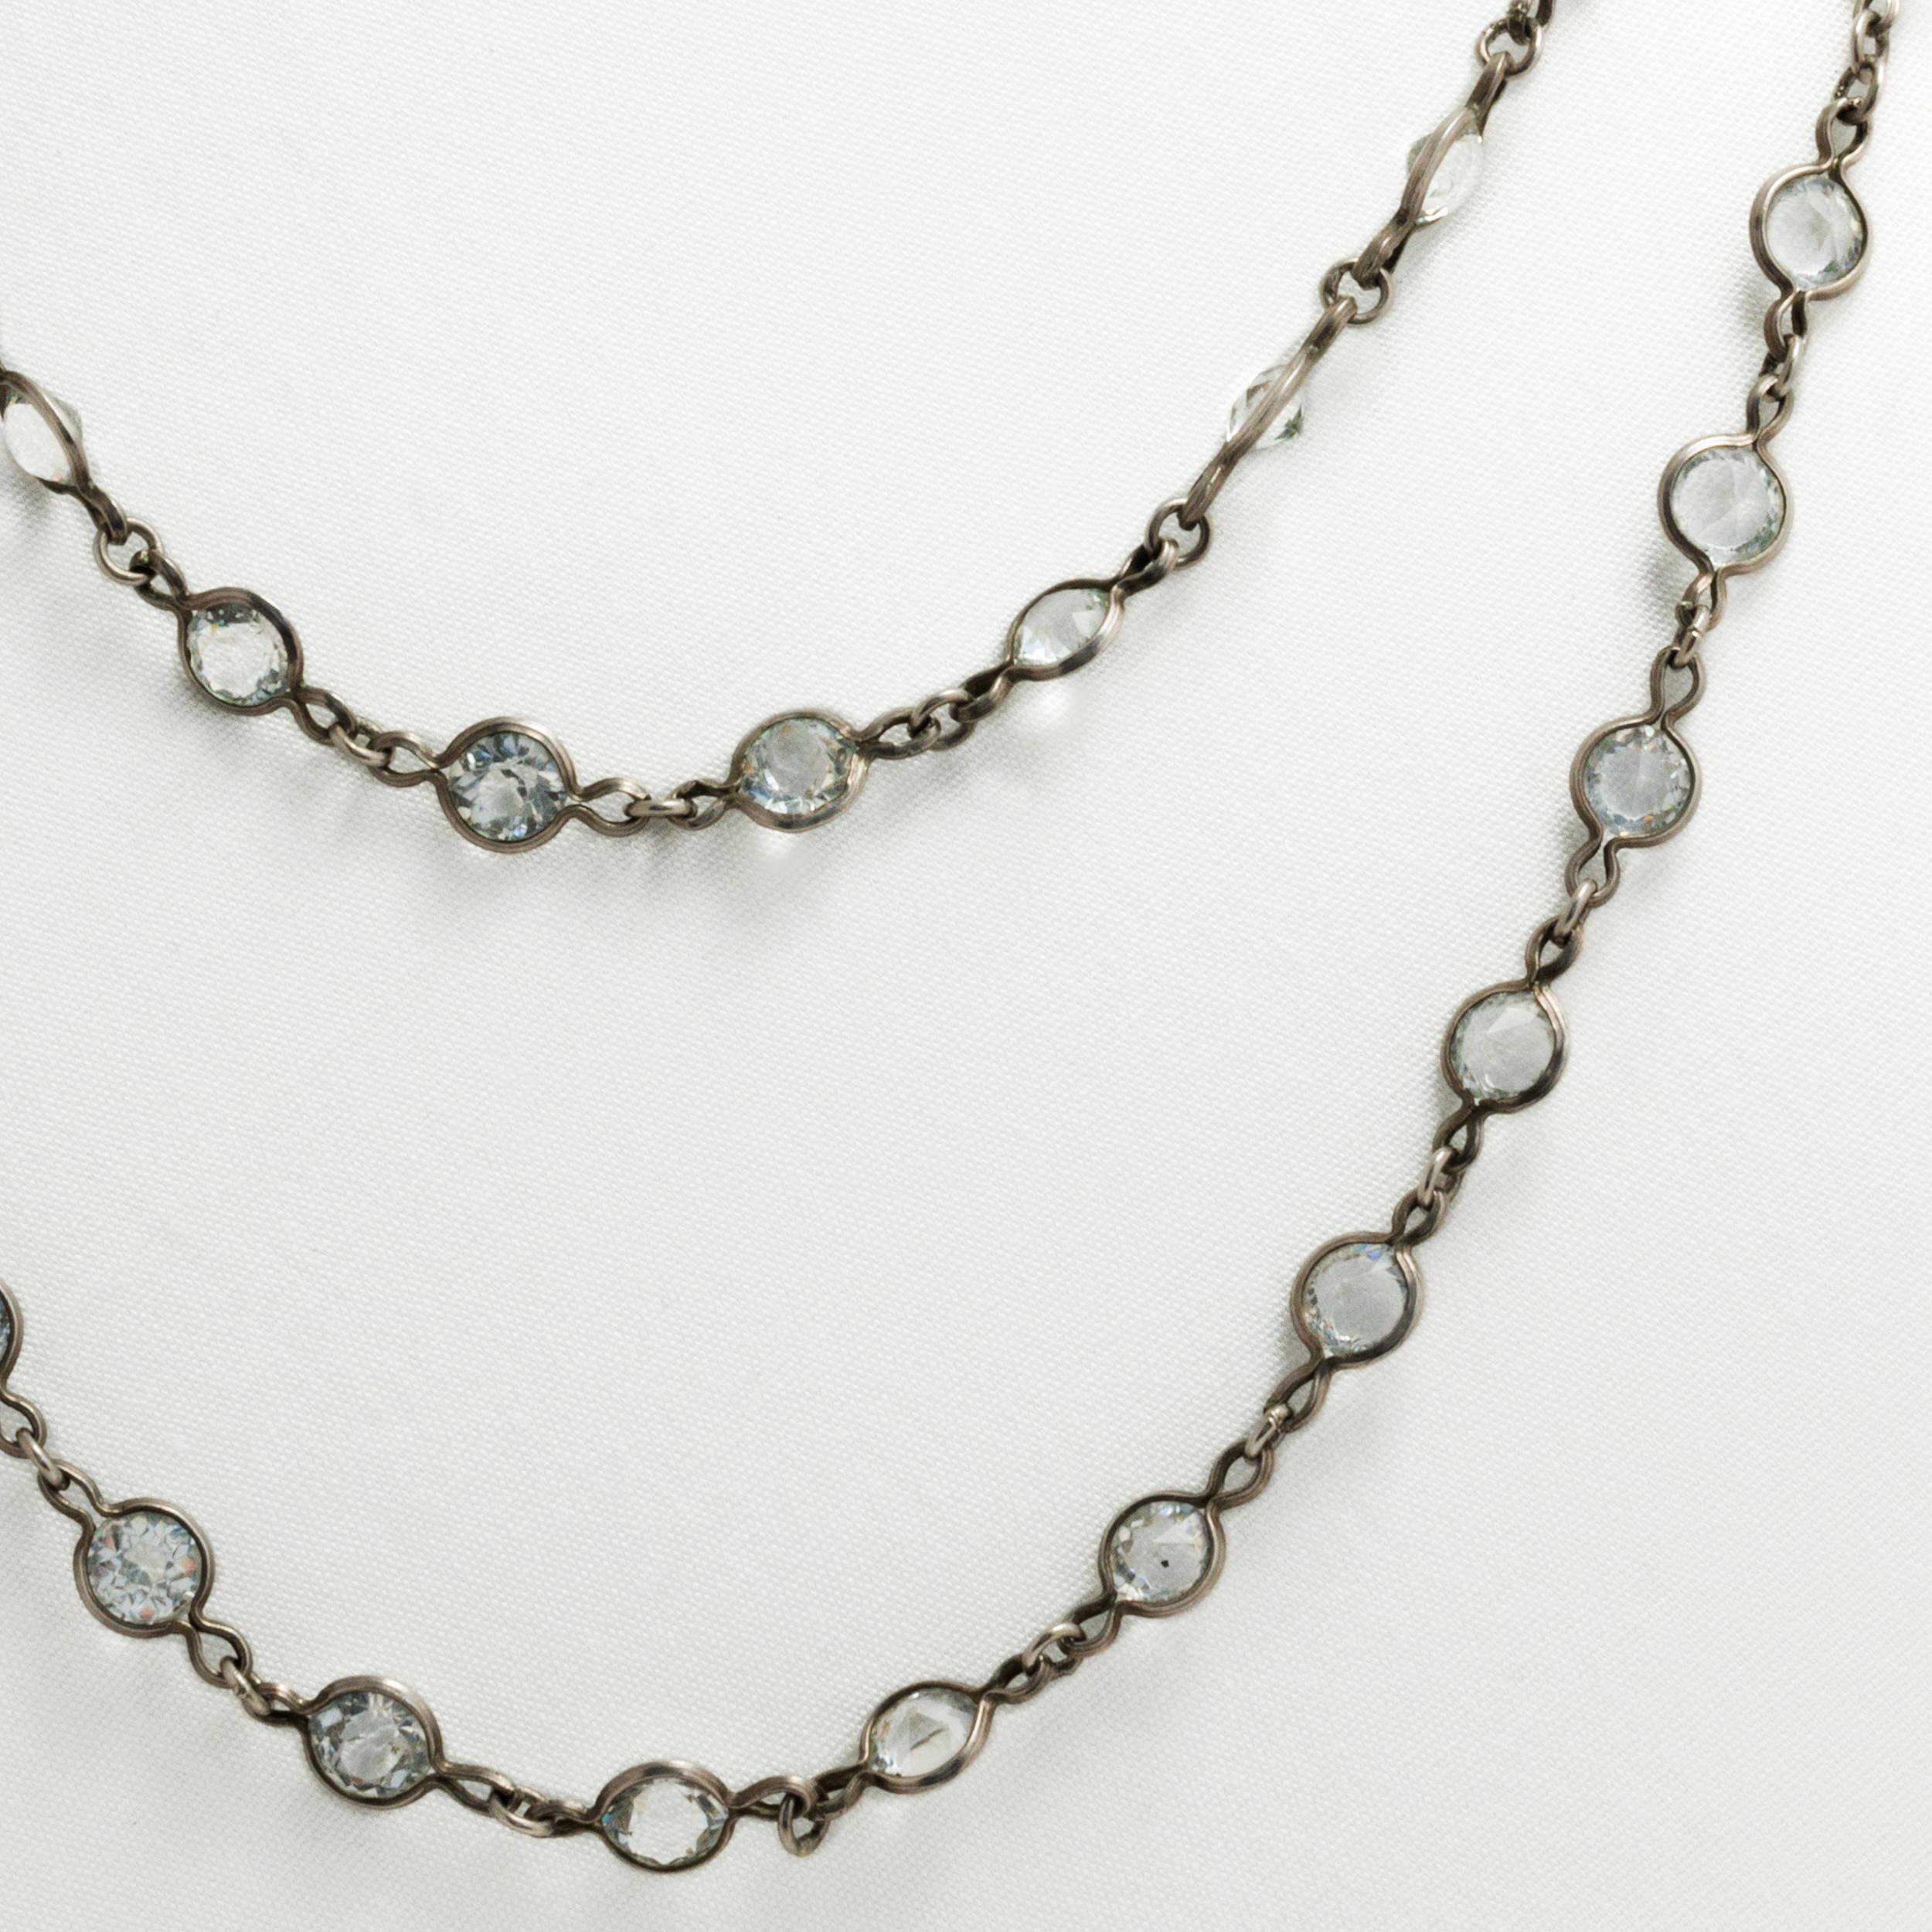 Antique Paste Cut Glass and Silver Long Chain In Good Condition For Sale In New York, NY